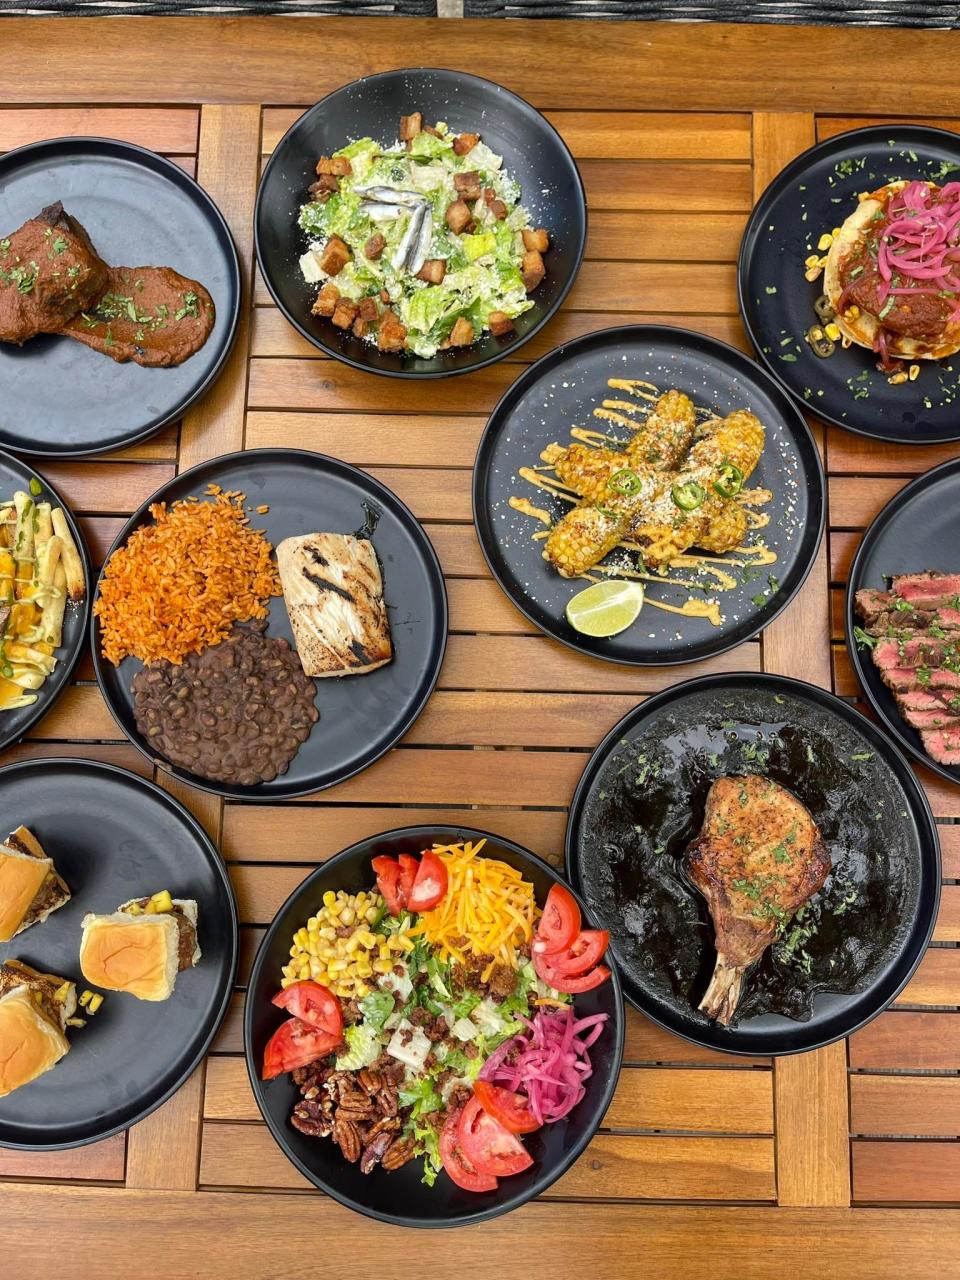 In Boynton Beach, A'Lu specializes in San Diego-style Mexican food and features tacos, salads, entrees and more.